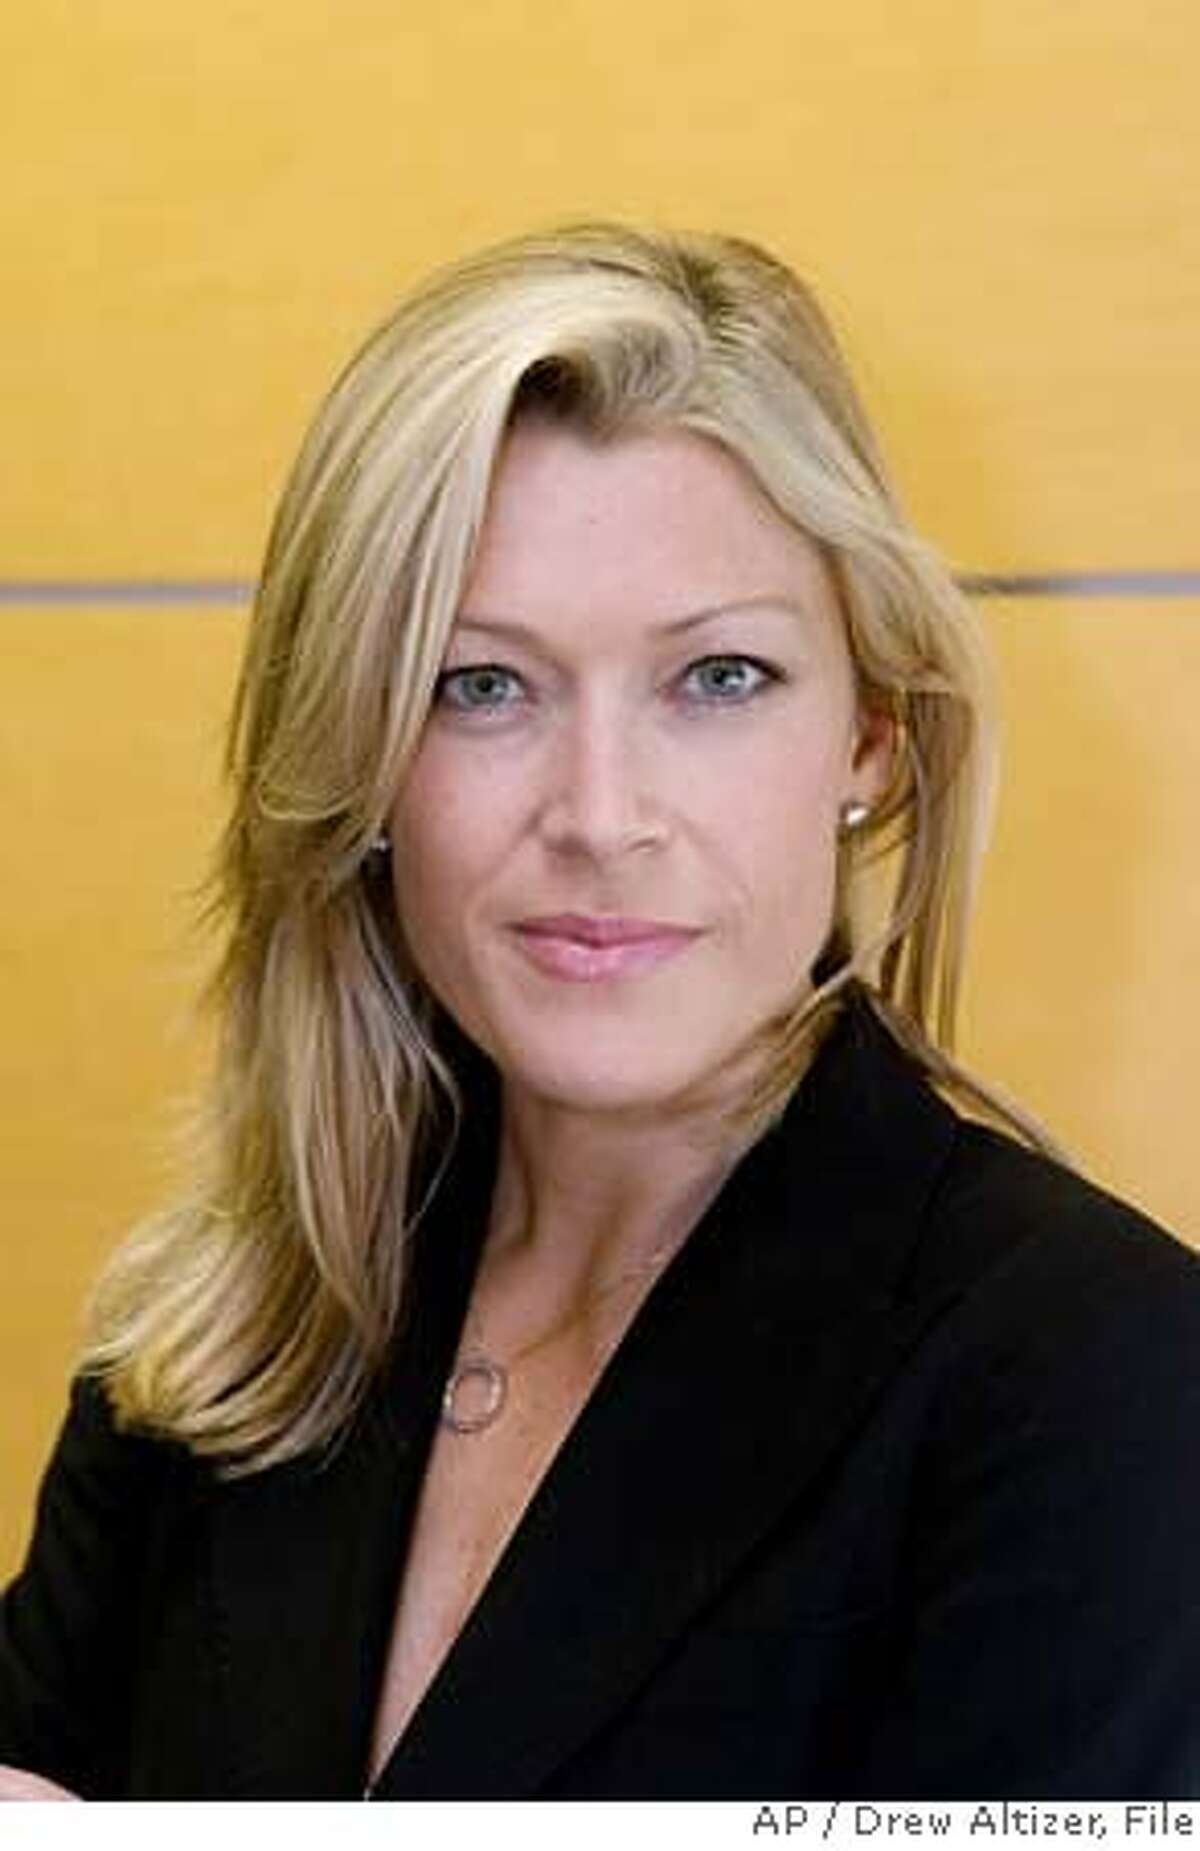 Ruby Rippey-Tourk, 34, who once worked as San Francisco Mayor Gavin Newsom's appointment secretary, is seen in this undated photo. Newsom apologized, Thursday, Feb. 1, 2007, for having a sexual relationship with Tourk who is married to Alex Tourk, Newsom's former campaign manager. Alex Tourk confronted the mayor and resigned on Wednesday, Jan. 31. (AP Photo/Drew Altizer) ** NO SALES, MAGS OUT, TV OUT ** Ran on: 02-02-2007 Ruby Rippey-Tourk is the married woman with whom Mayor Gavin Newsom had an affair. Ran on: 02-07-2007 Peter Ragone Ran on: 02-07-2007 Peter Ragone NO SALES, MAGS OUT, TV OUT